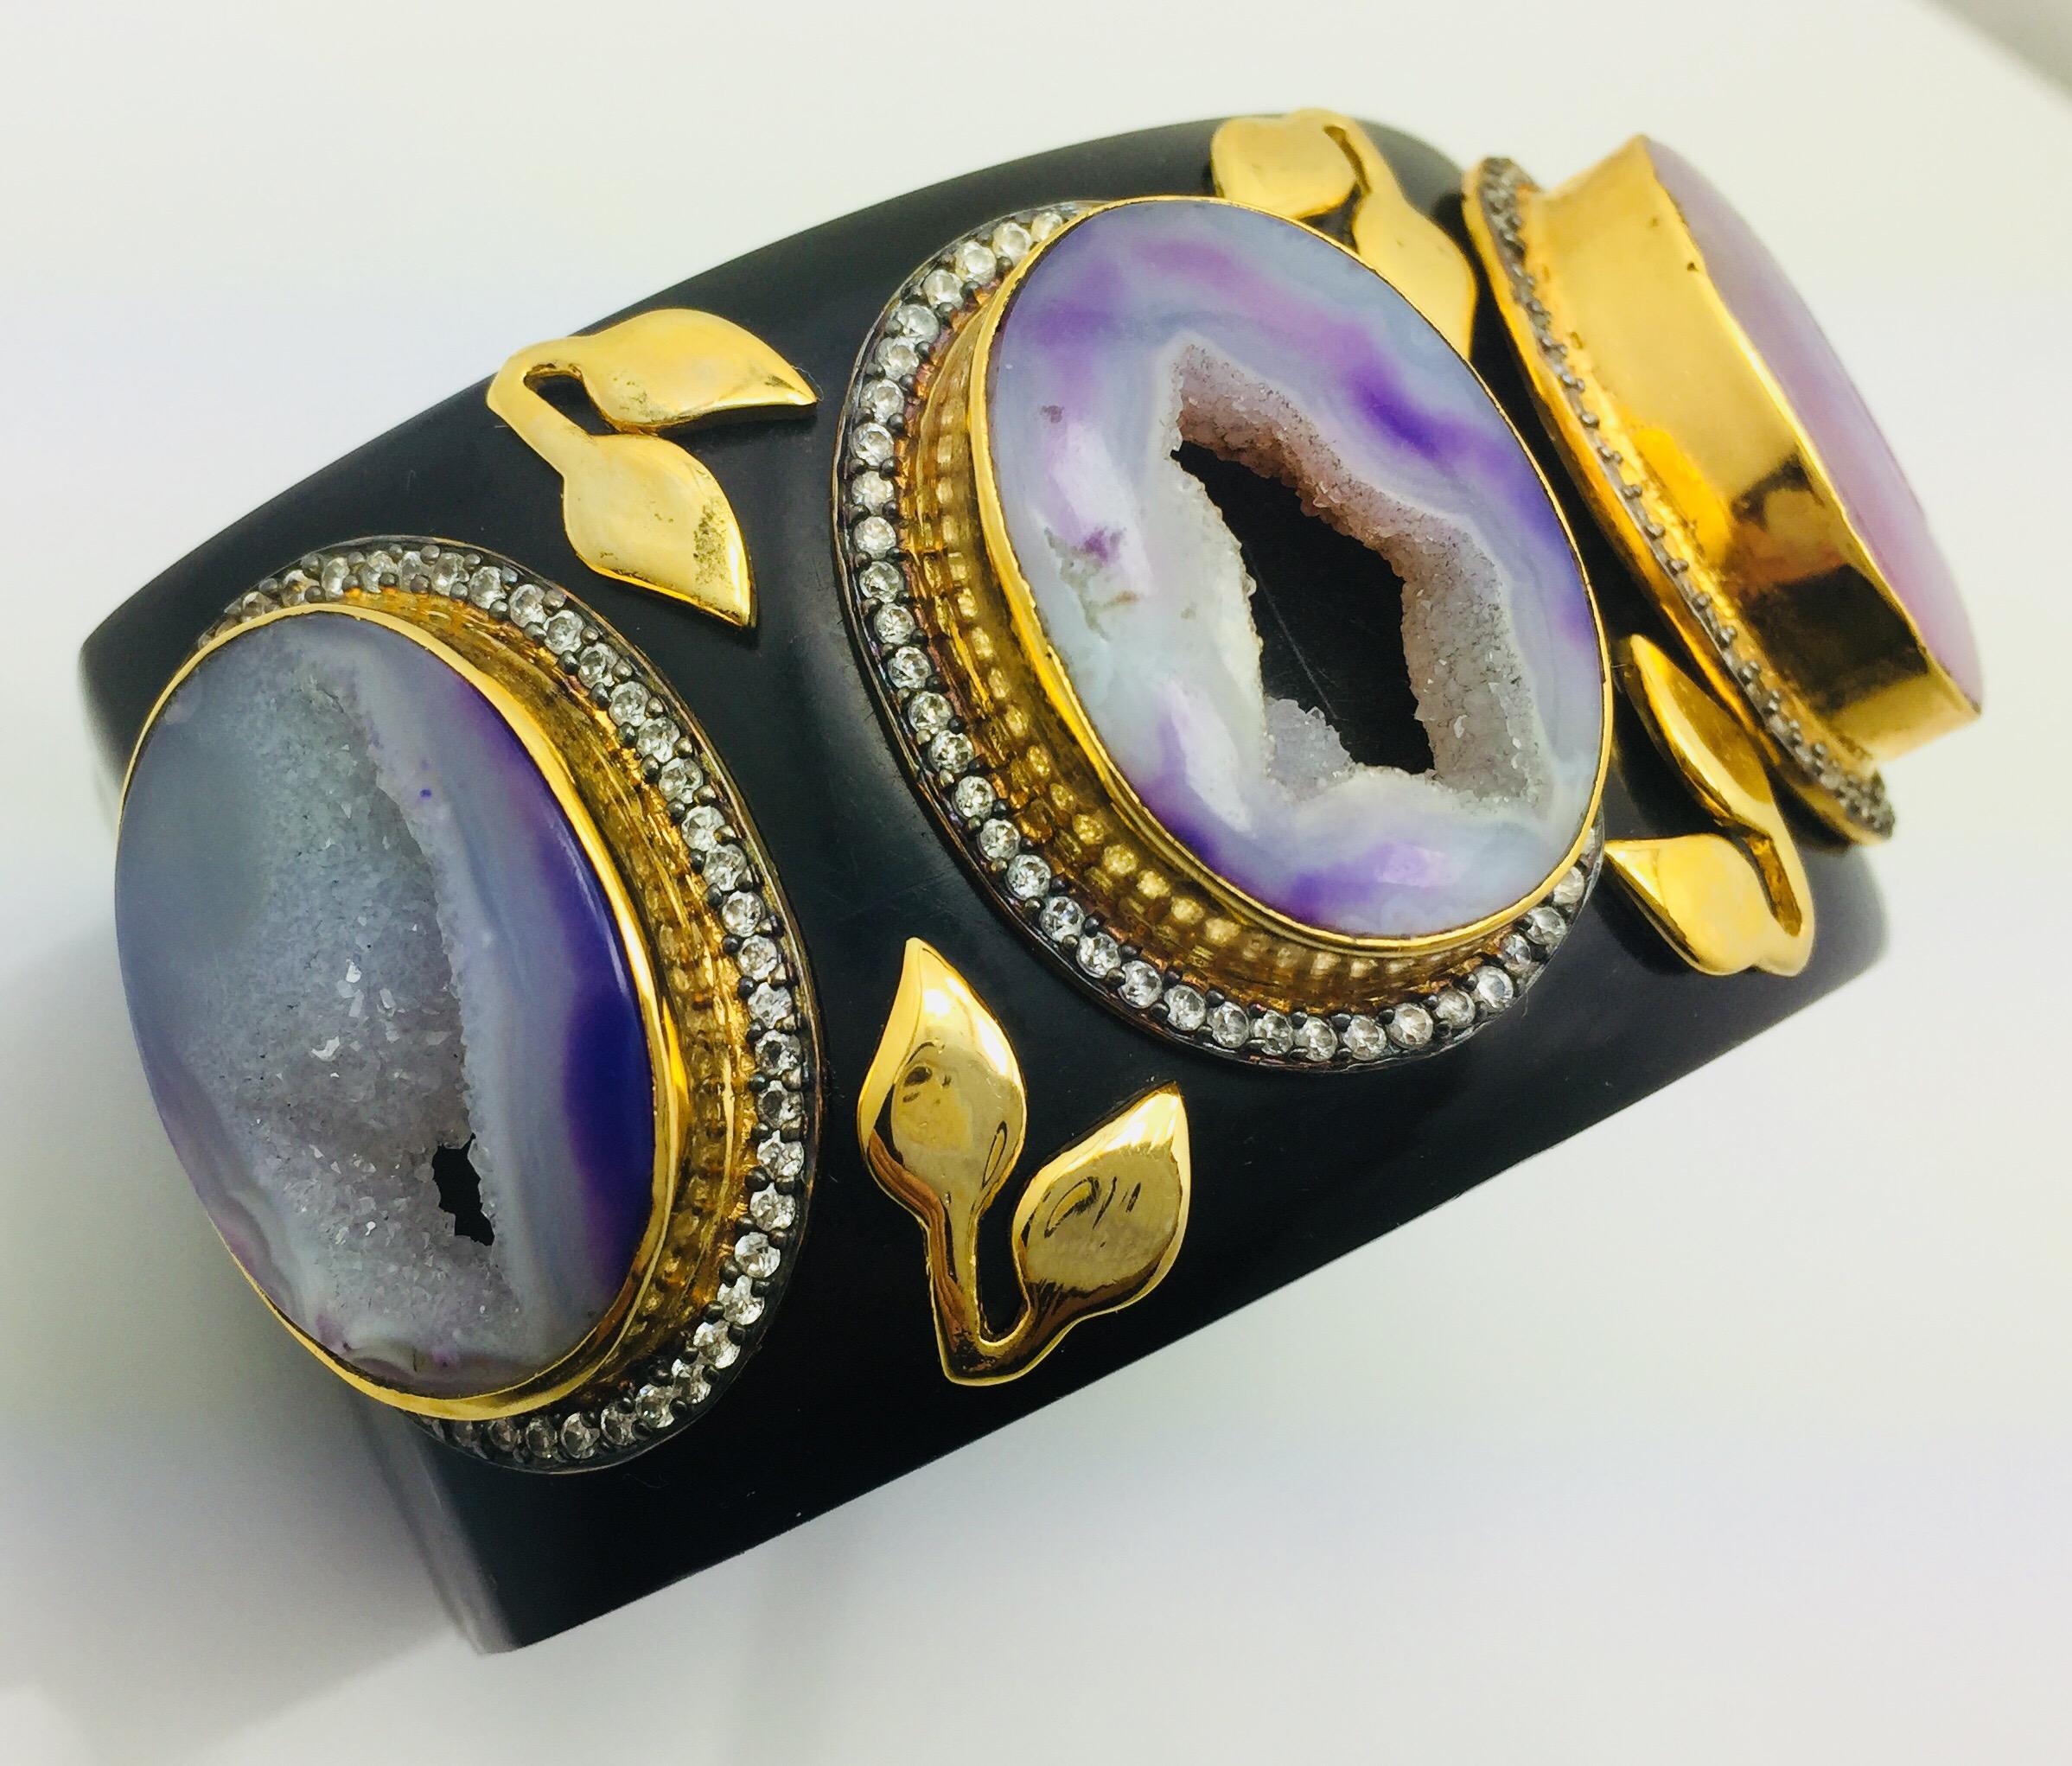 The smooth black resin bracelet provides a stunning backdrop for the one of a kind crater purple druzy stones. Each of the druzy is framed with dazzling cubic zircon and embellished with handcrafted leaf motif.  The bracelet is hinged and fastens